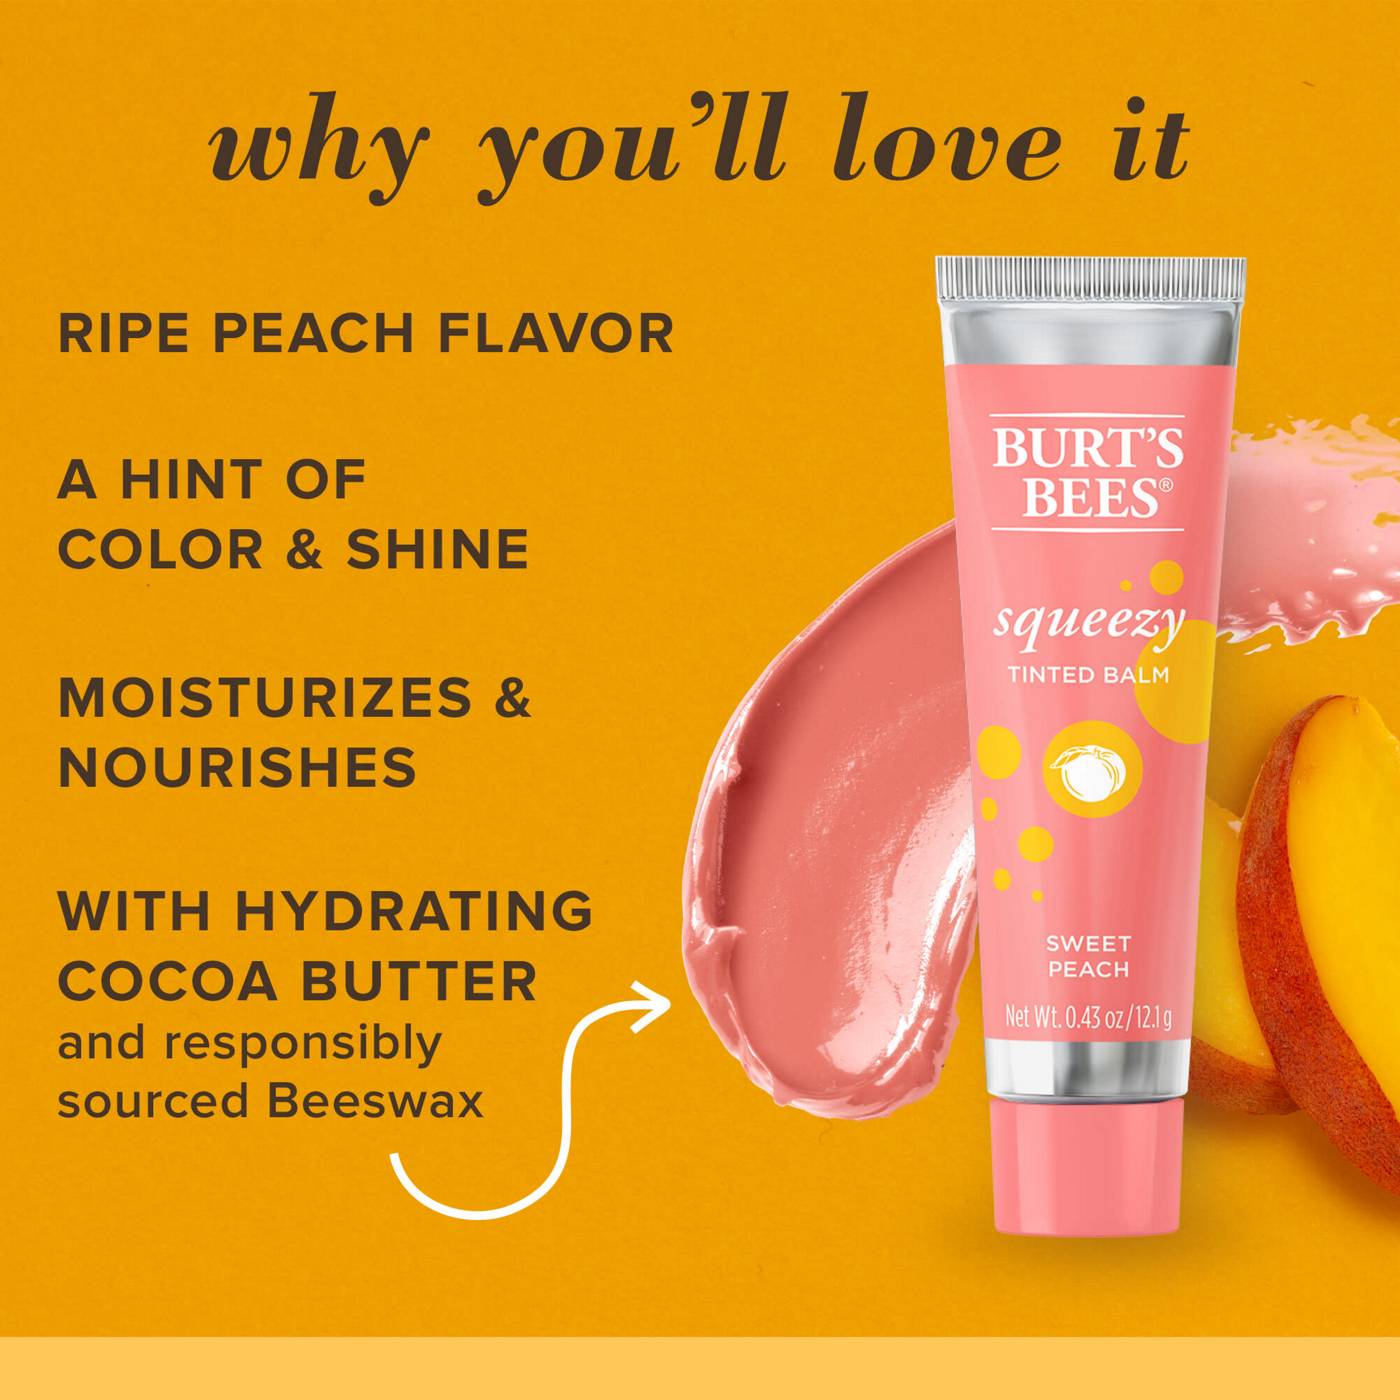 Burt's Bees Squeezy Tinted Lip Balm - Sweet Peach; image 6 of 12